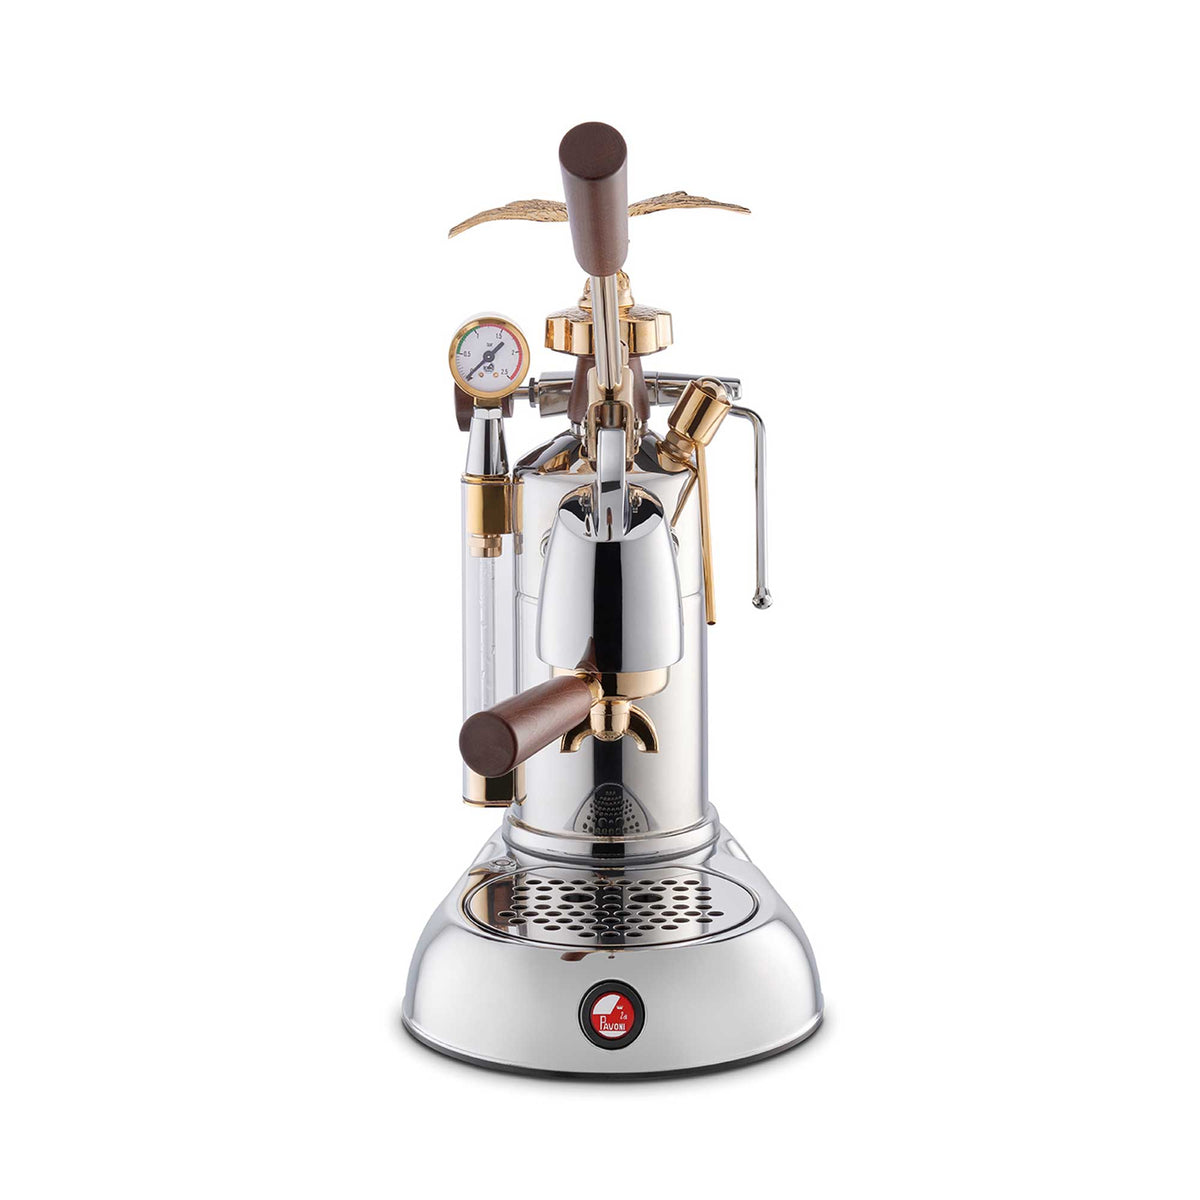 We provide La Pavoni Expo 2015 Lever Coffee Machine - Stainless Steel Gold  and Wood La Pavoni for our loyal customers at a reasonable cost along with  a high standard of service